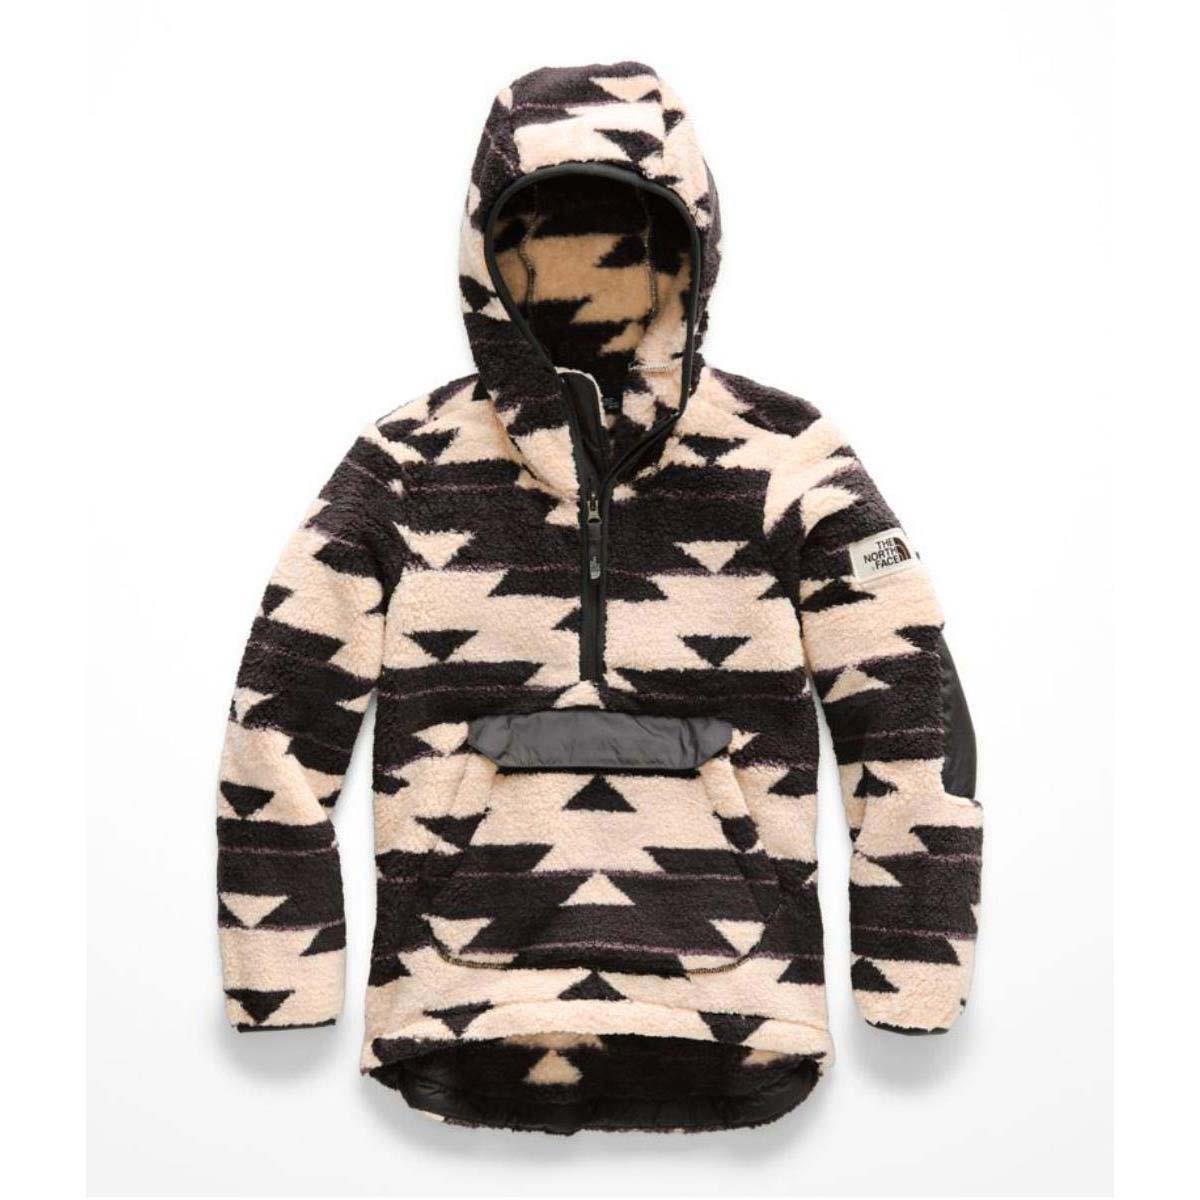 north face campshire hoodie camo